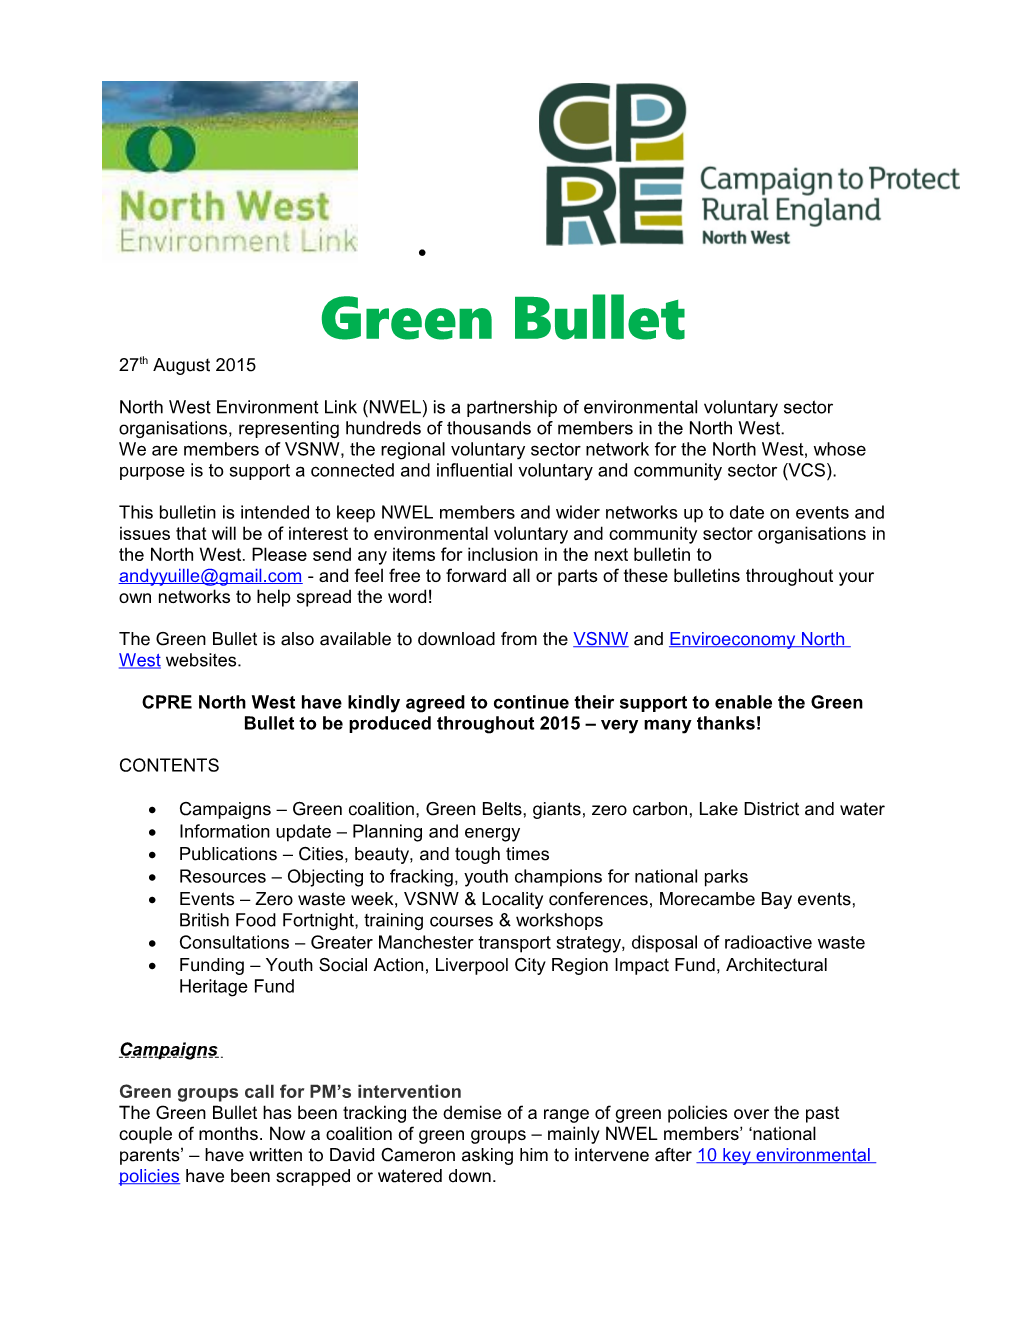 North West Environment Link (NWEL) Is a Partnership of Environmental Voluntary Sector